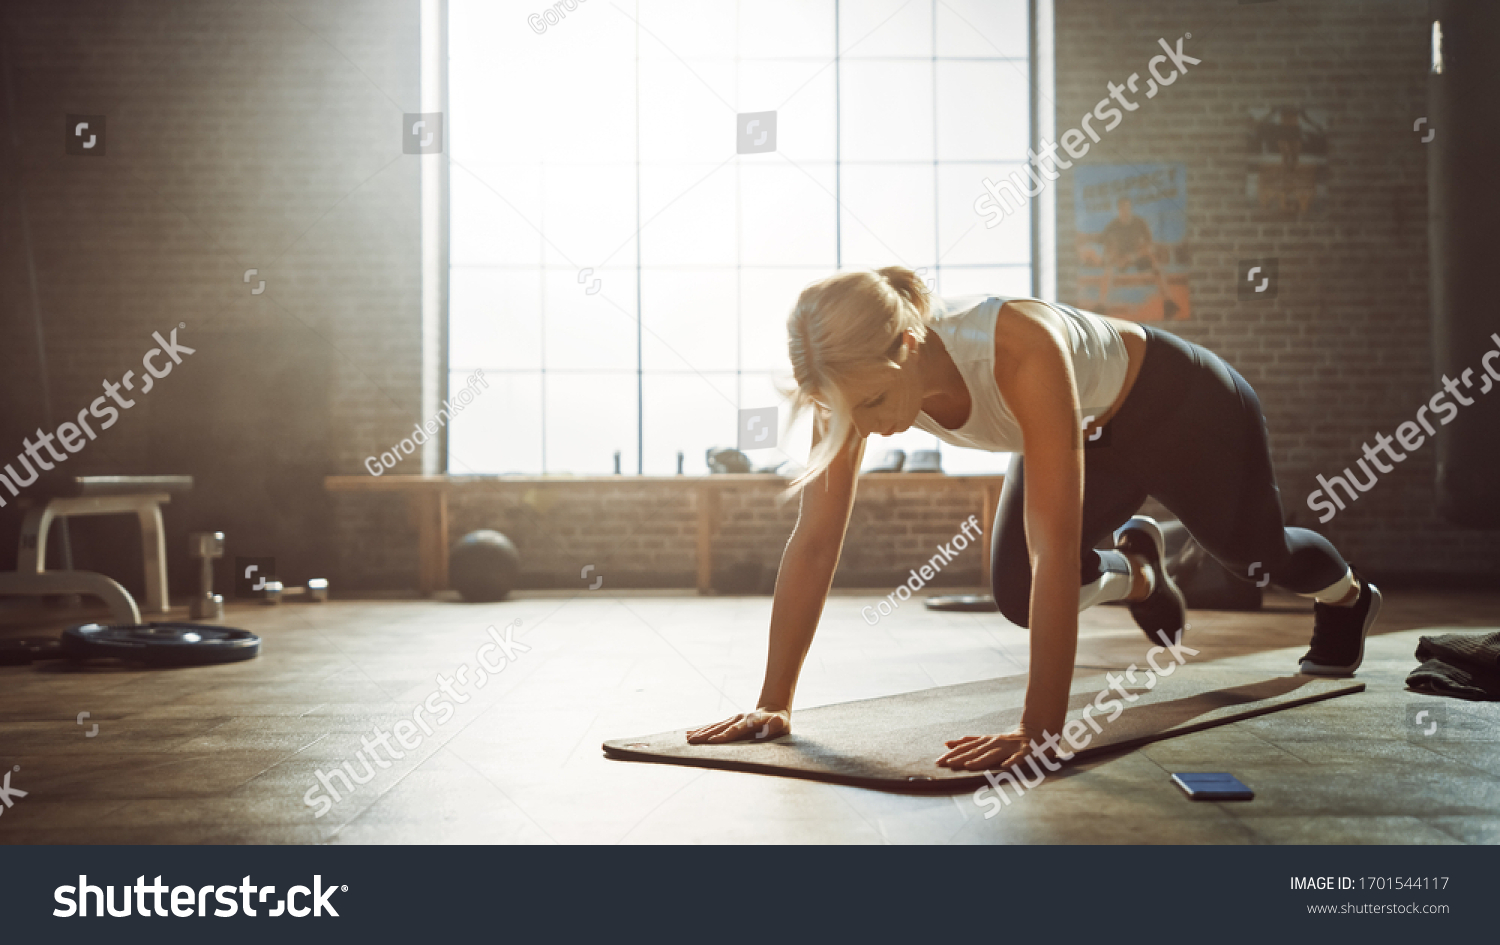 Beautiful and Young Girl Doing Running Plank Exercise on Her Fitness Mat. Athletic Woman Does Mountain Climber Workout in Stylish Hardcore Gym #1701544117